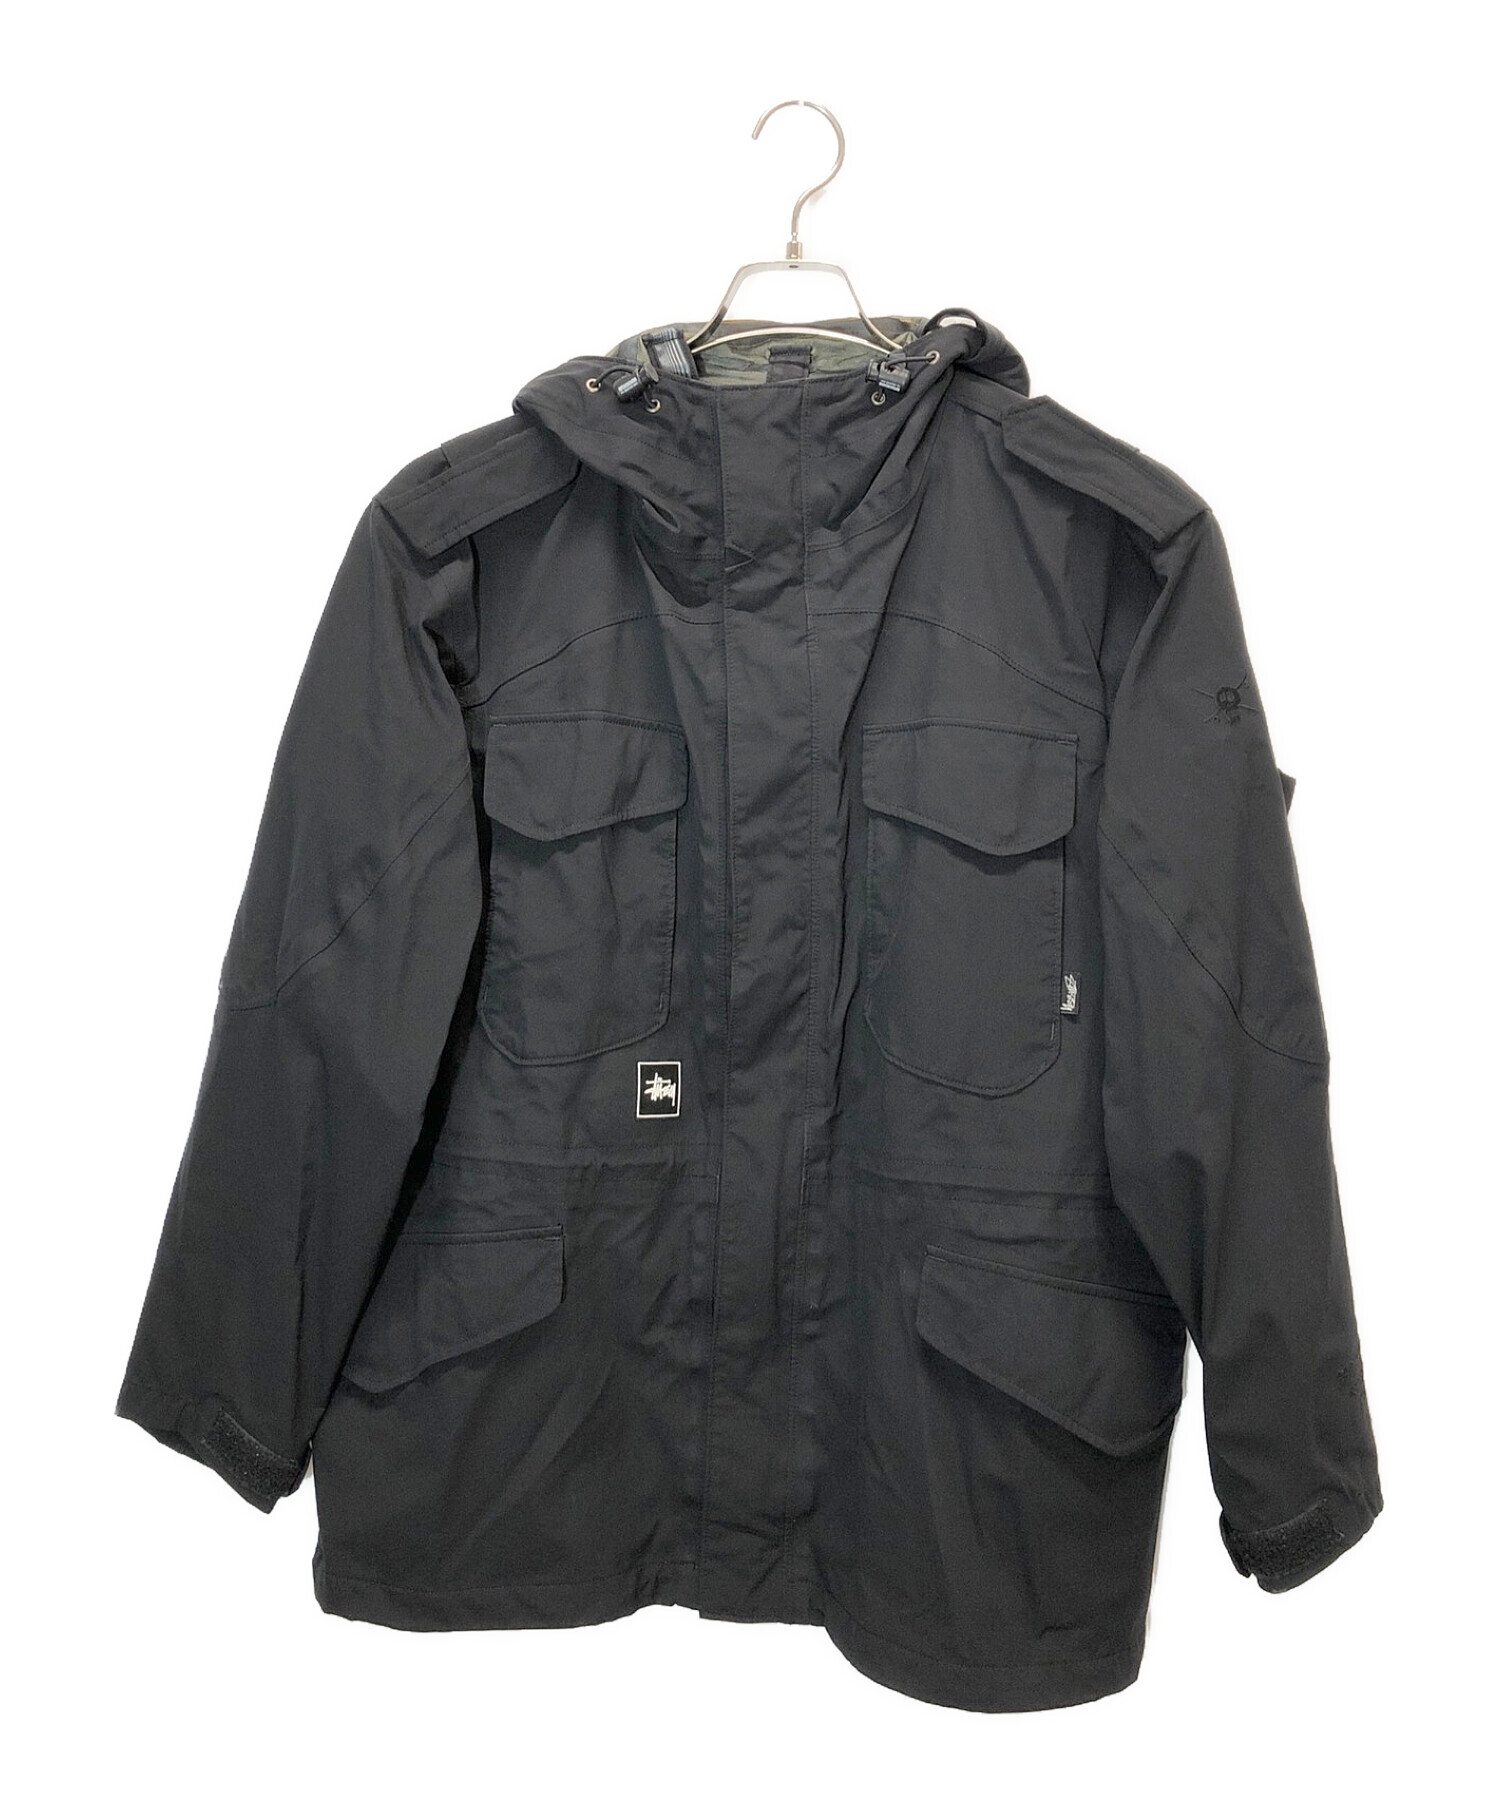 00s OLD STUSSY GORE-TEX military jacket - アウター